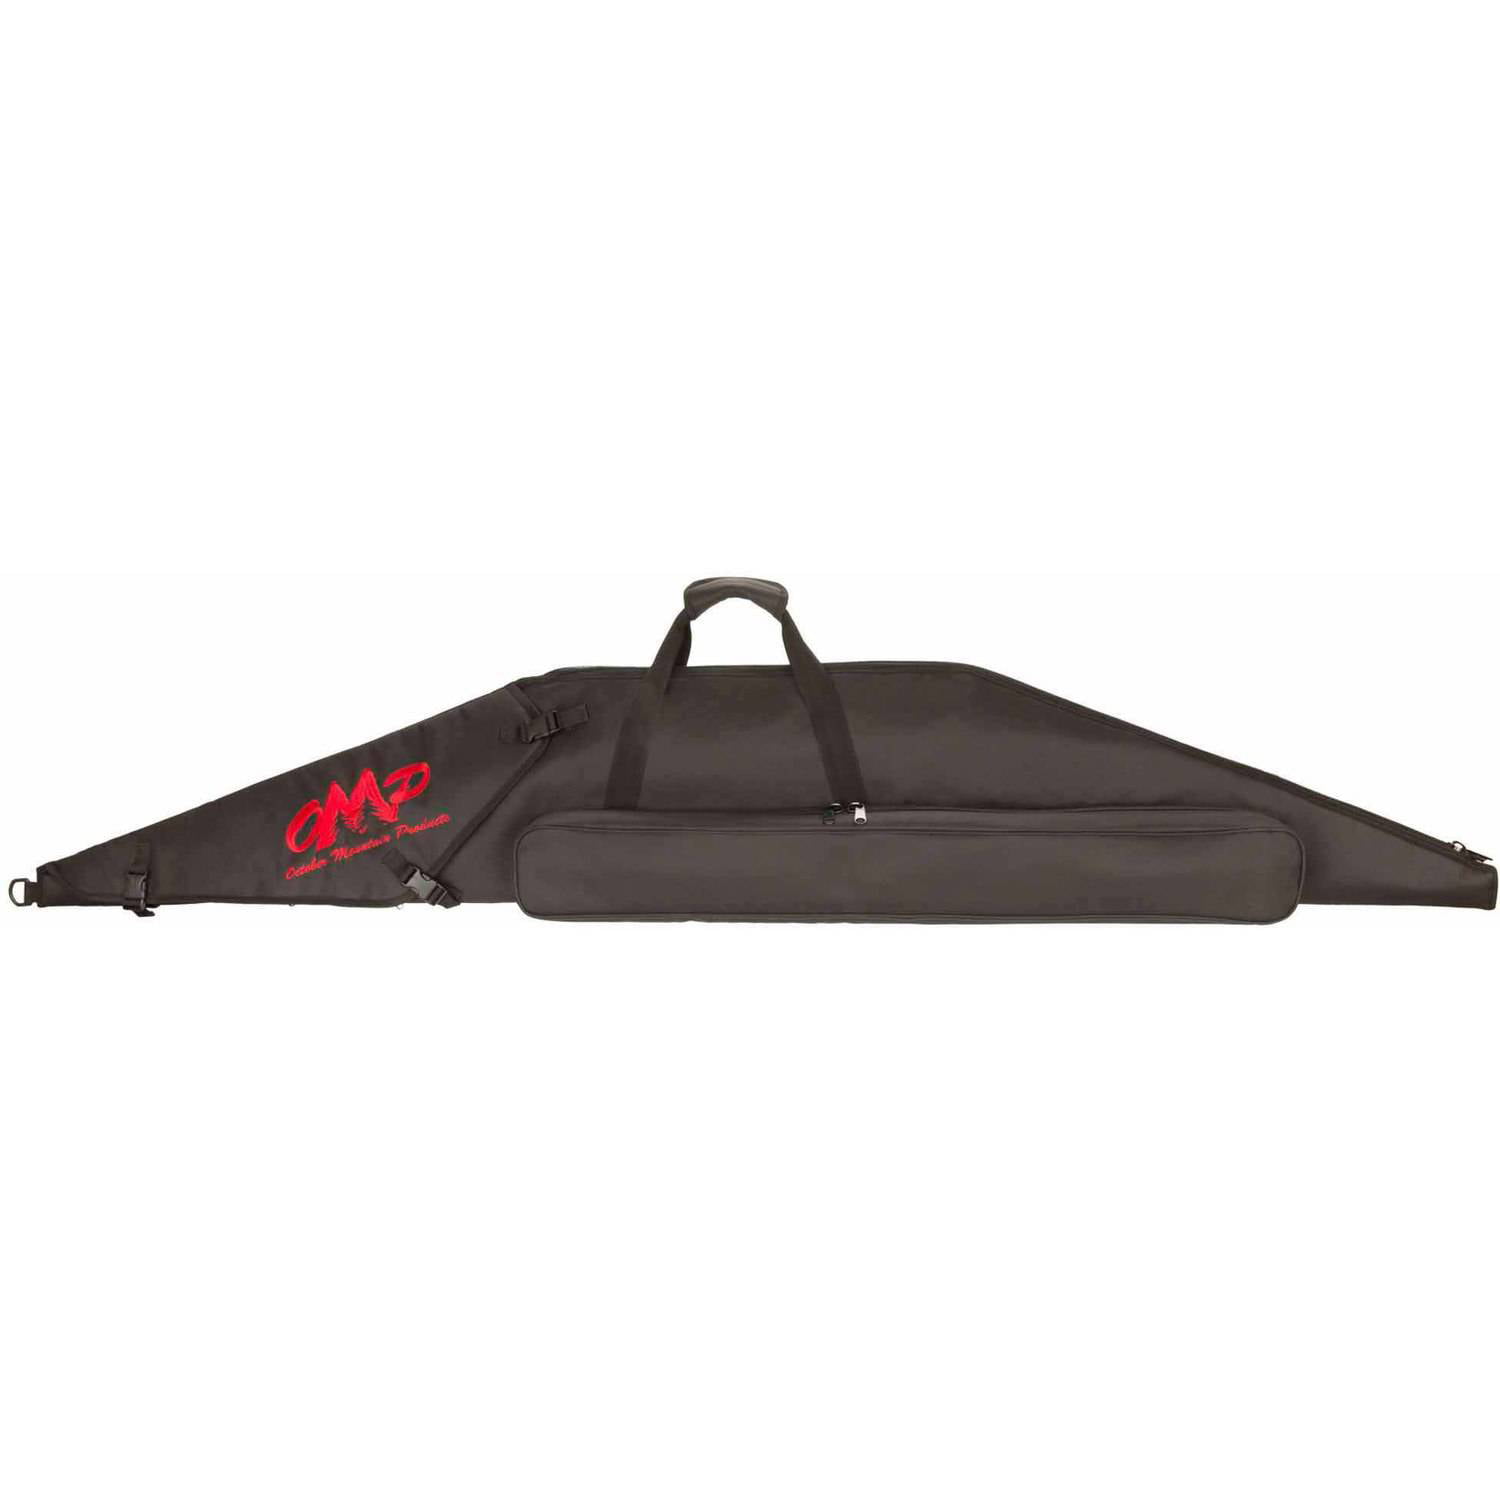 BLACK OMP TAKEDOWN RECURVE BOW CASE WILL ACOMODATE BOWS UP TO 66" 